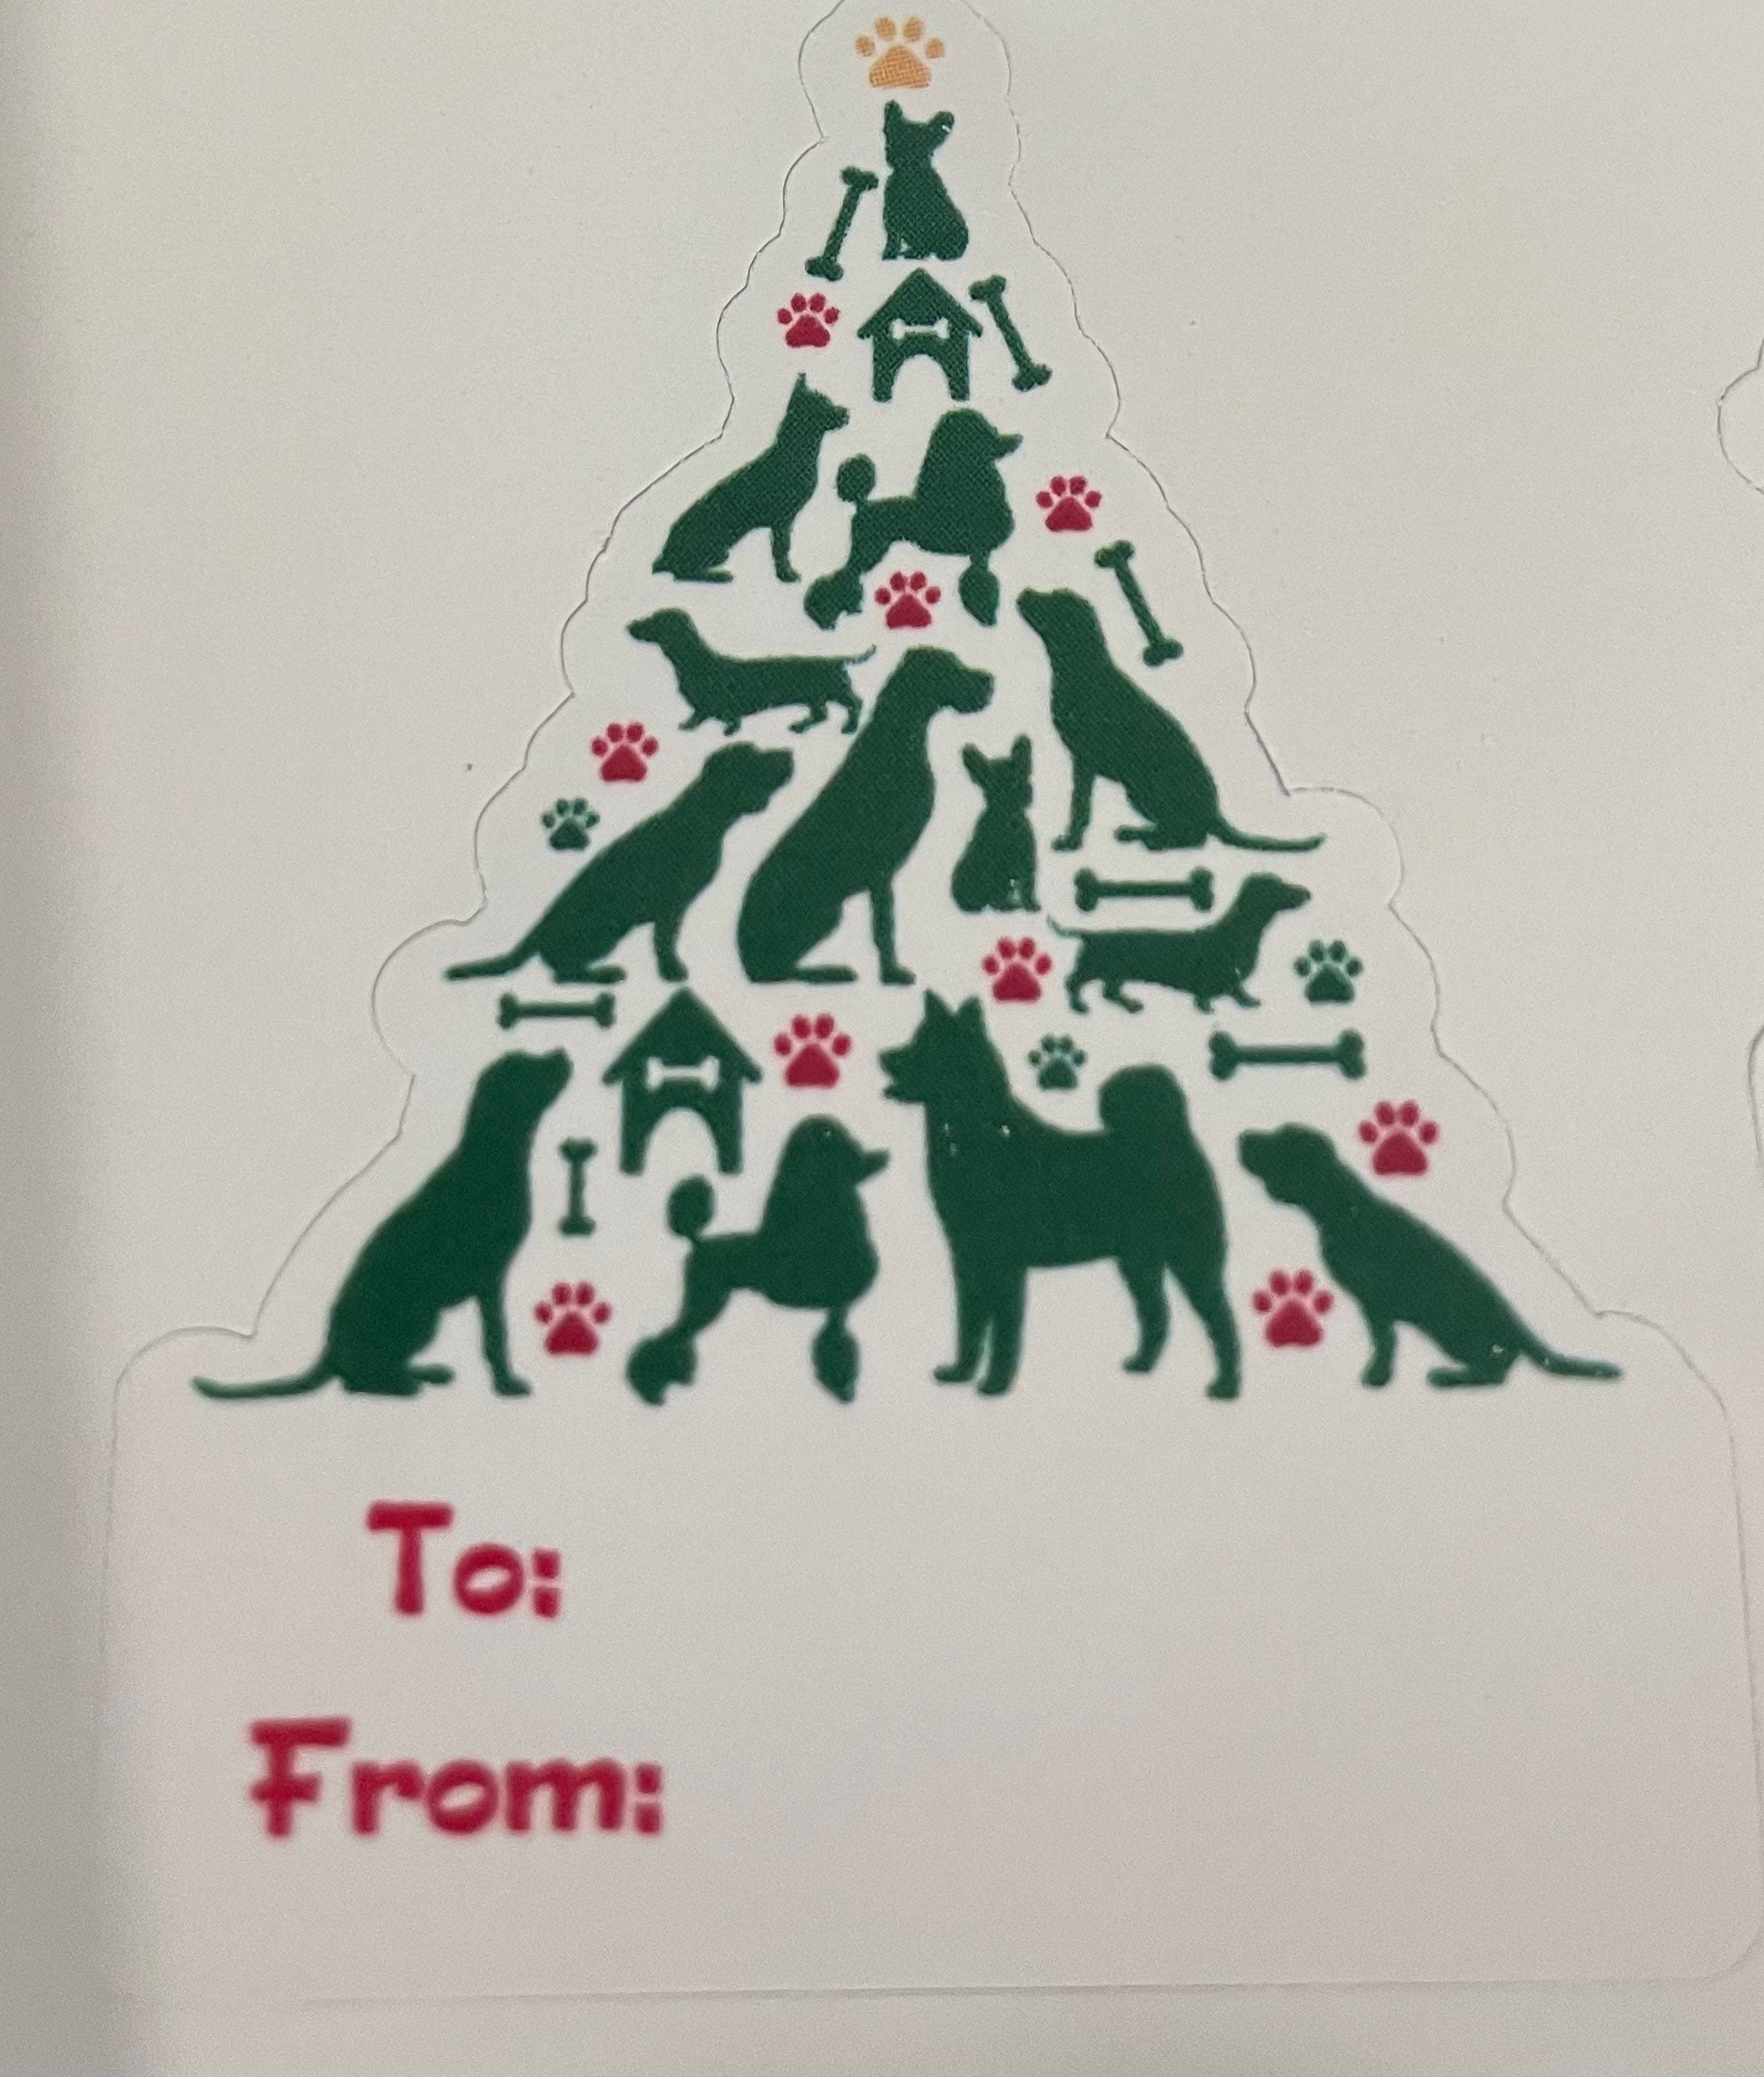 Dogs Cats Christmas Gift Tags - Funny Christmas Tags For Pet Lovers Friend  - Christmas Tree Mini Cards 